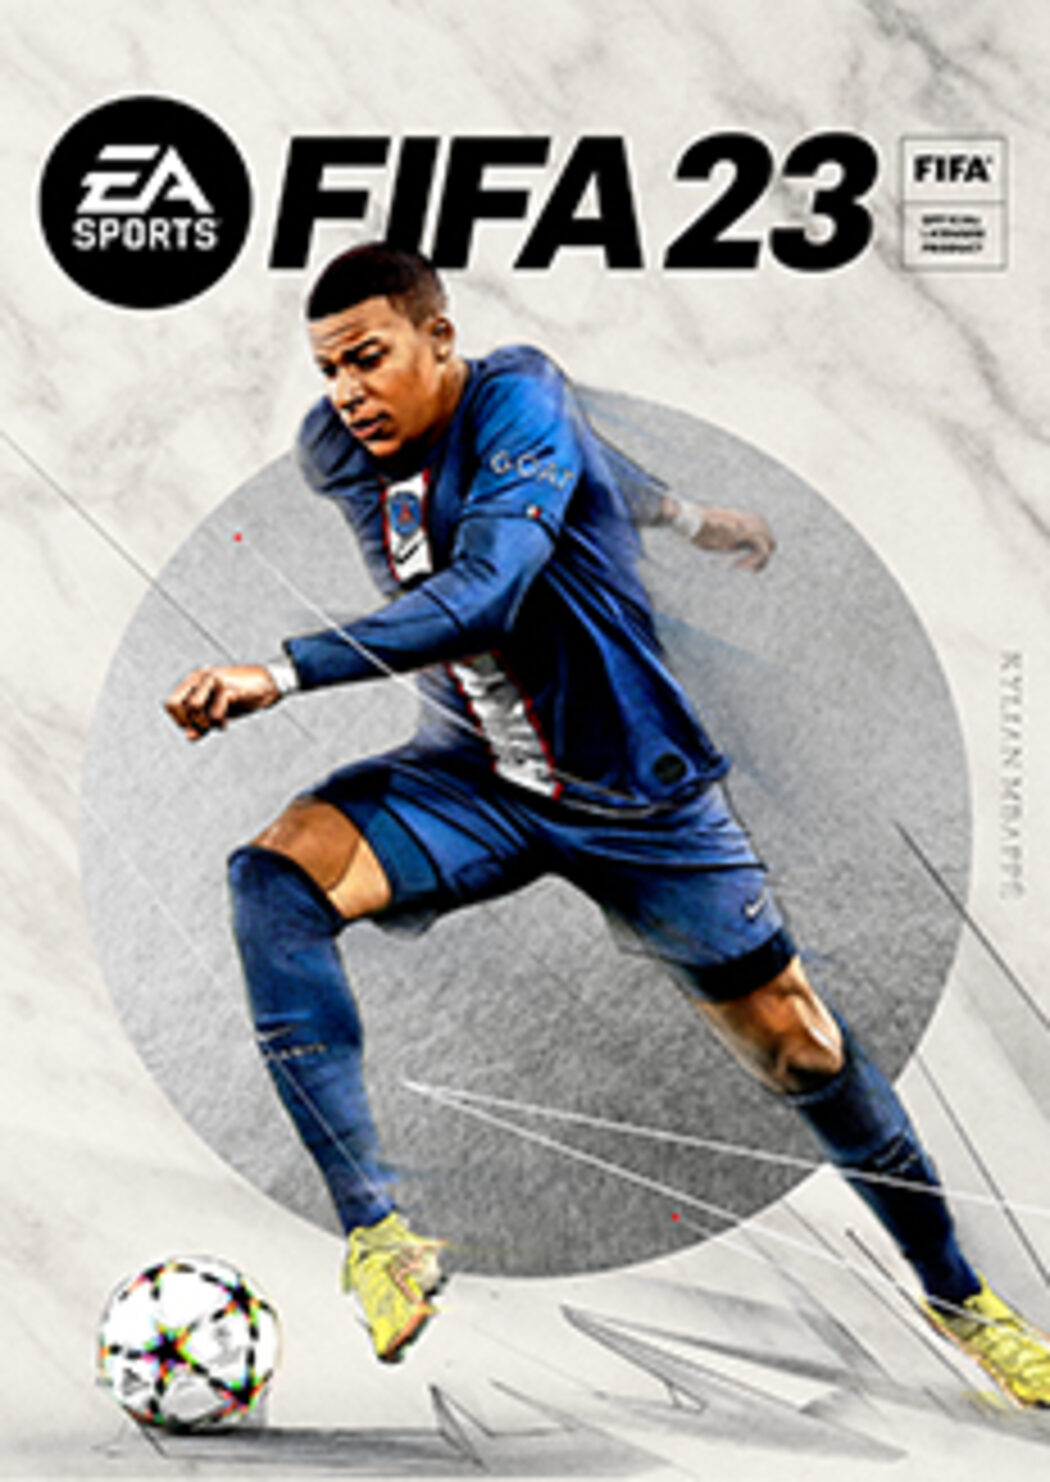 How to redeem FIFA 23 Steam Key